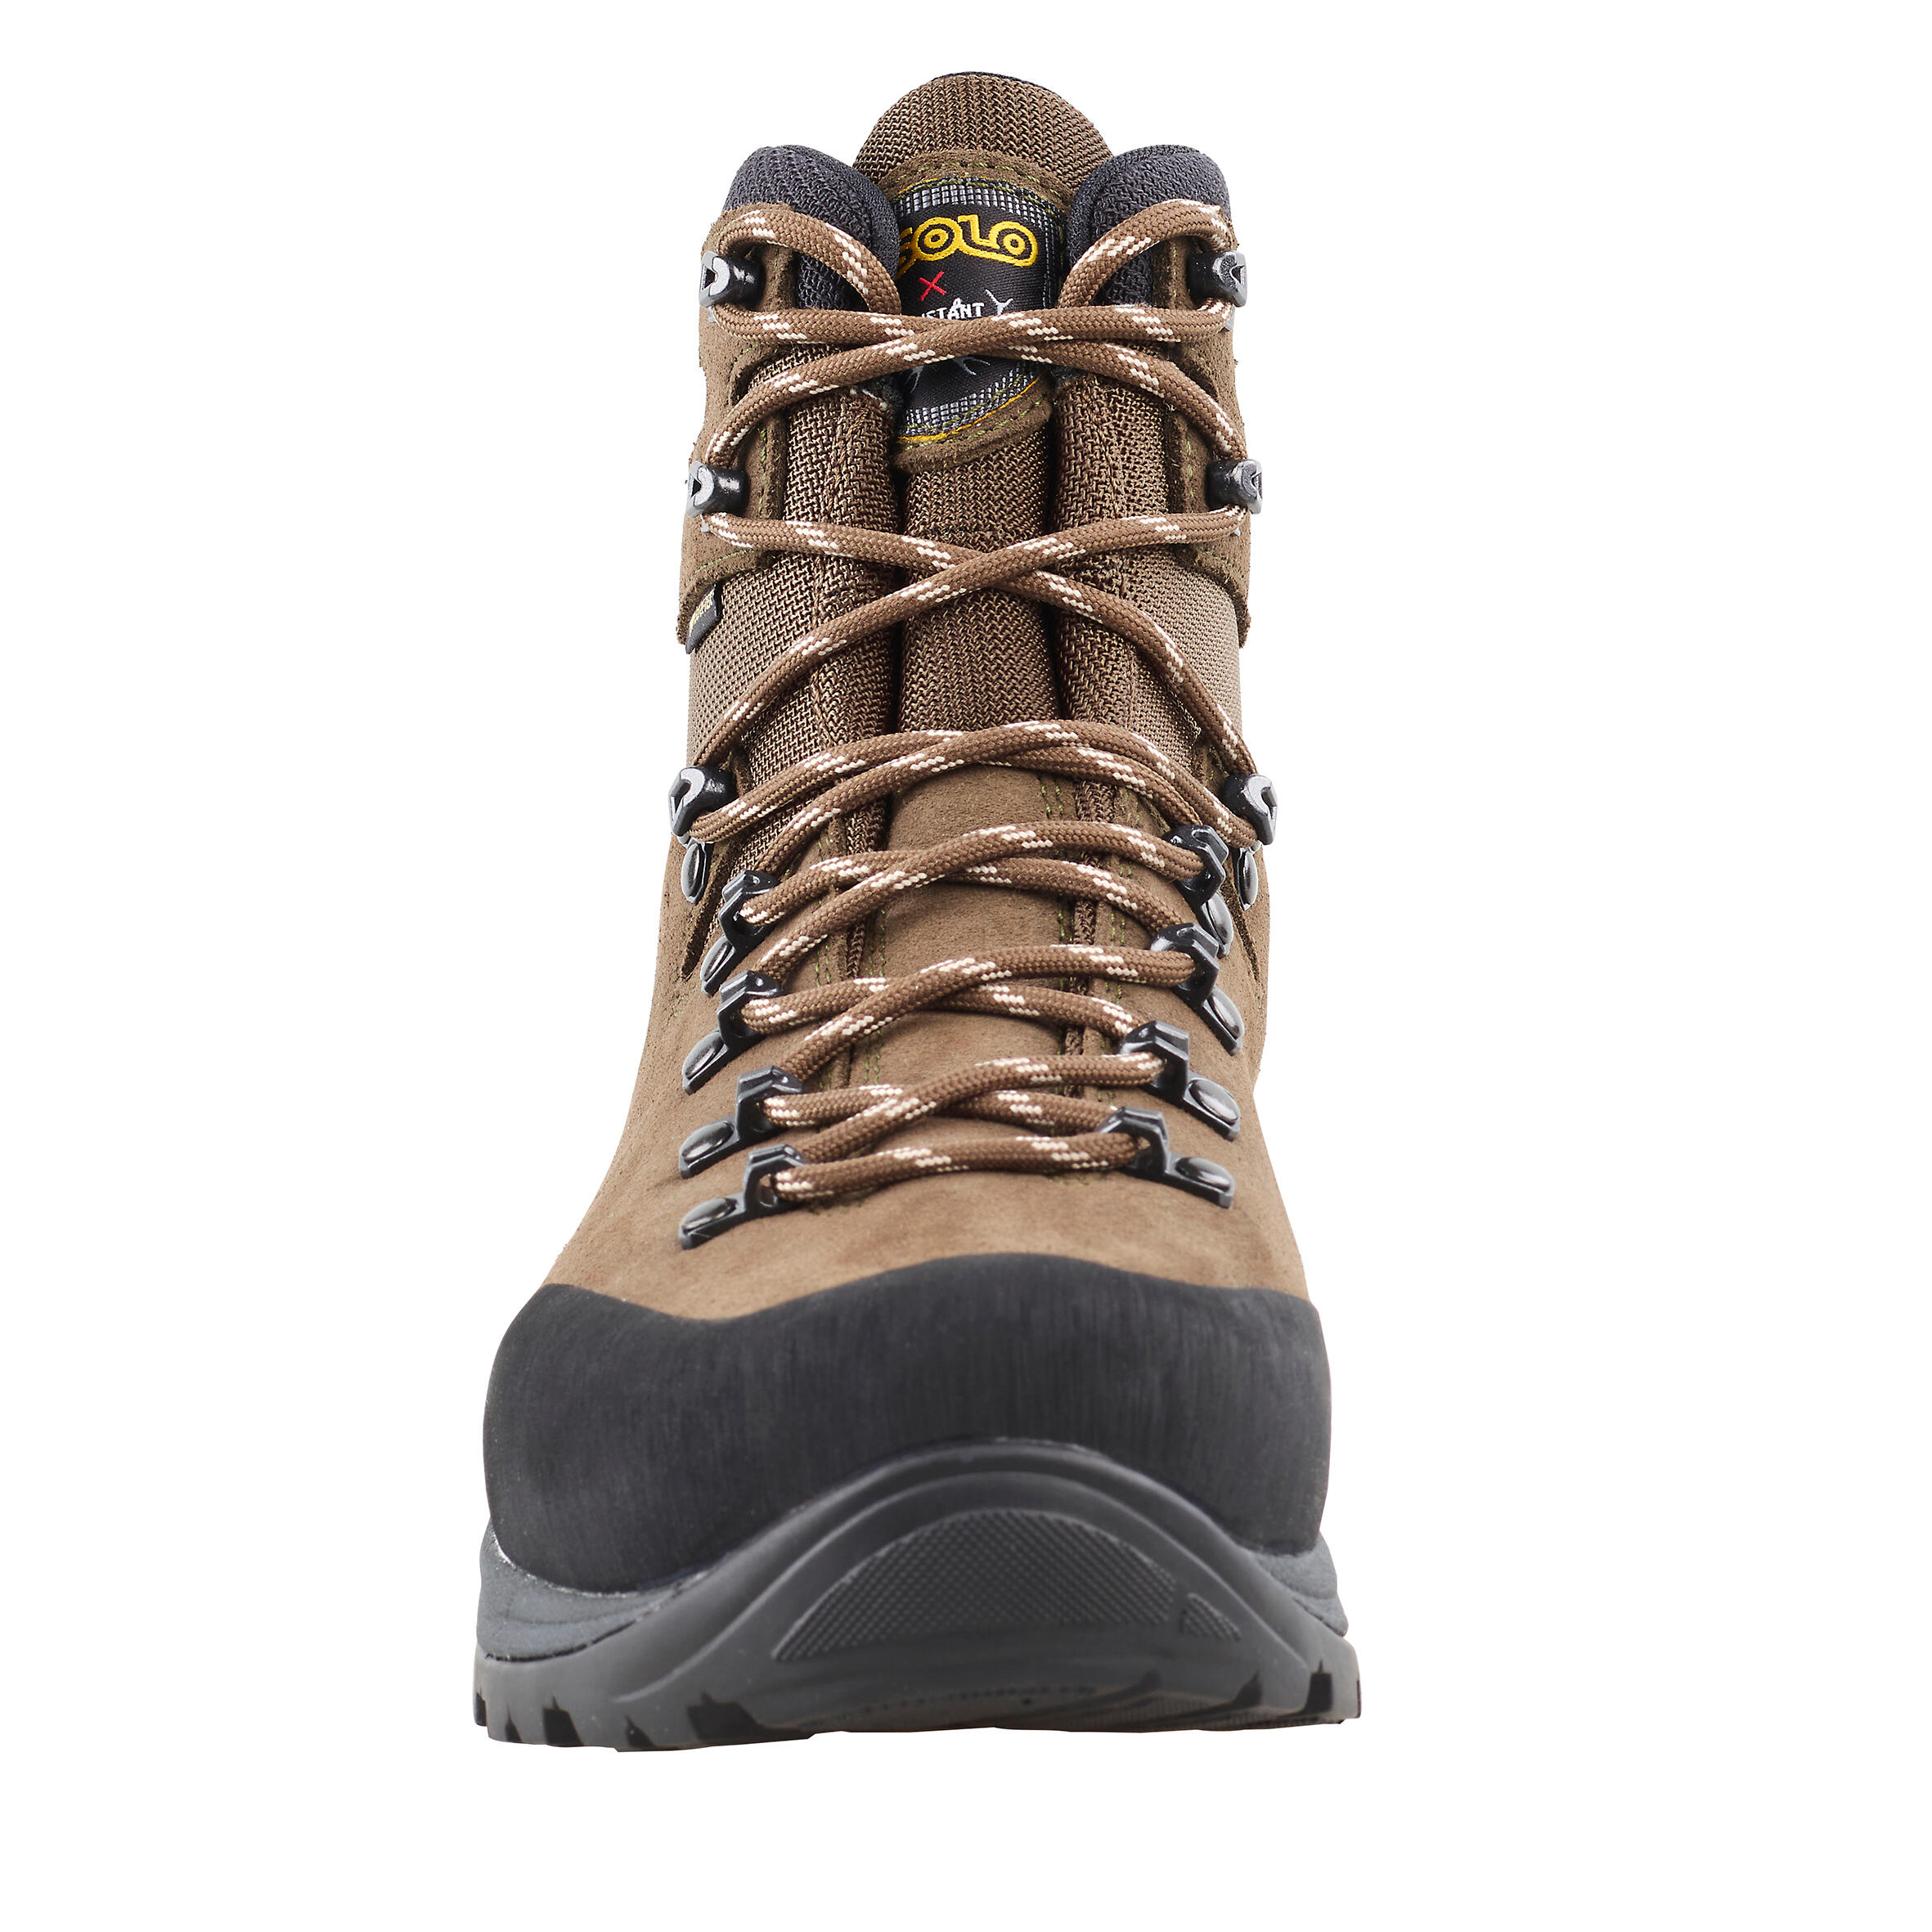 Waterproof Country Sport Boots Asolo X-Hunt Forest Gore-Tex Vibram 6/14